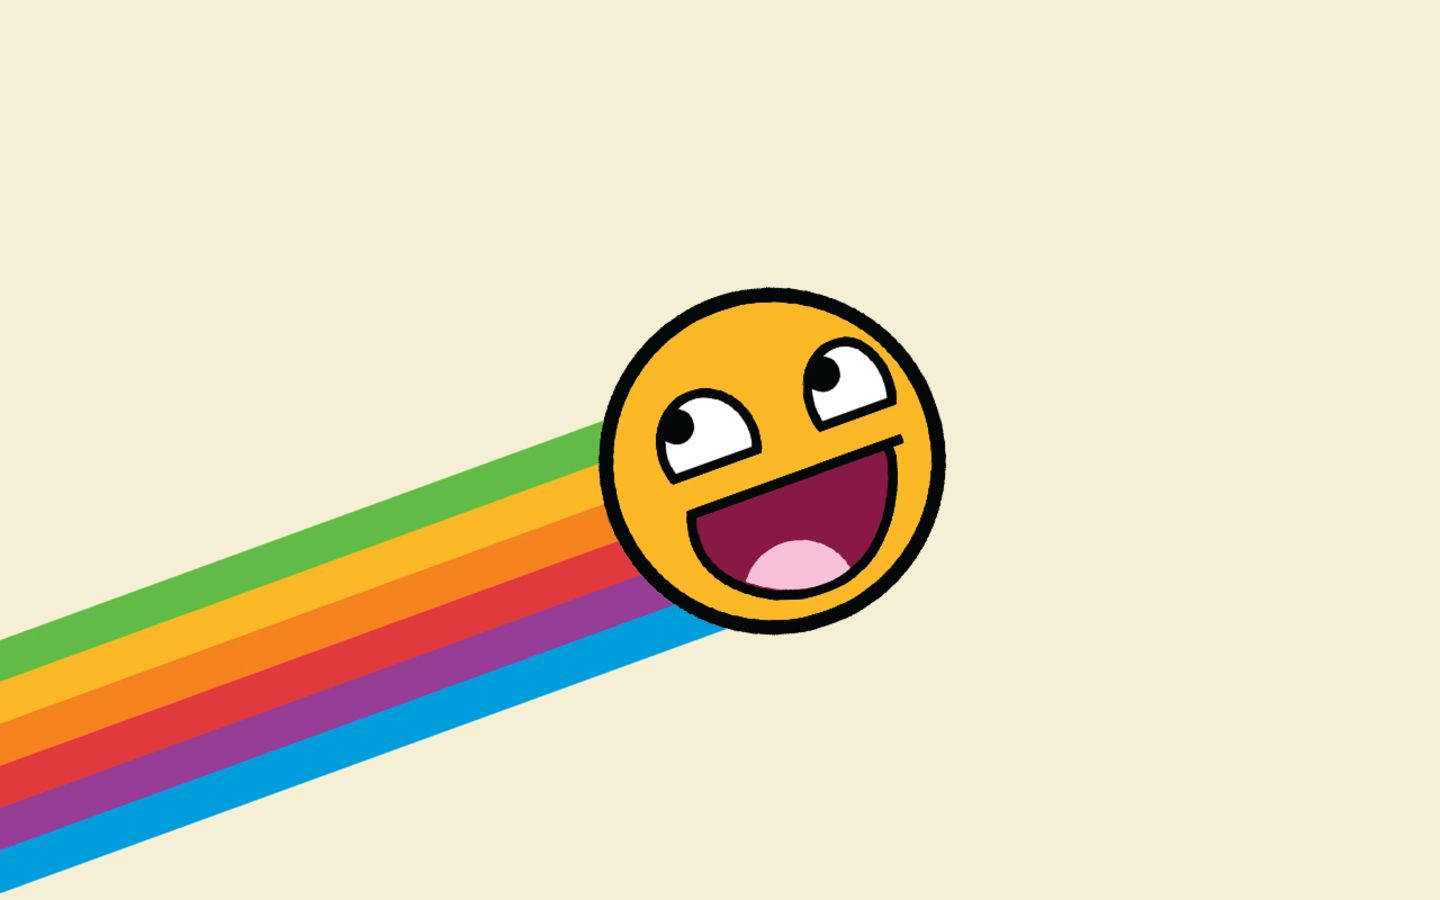 Smiley Face With Rainbow Trail Wallpaper